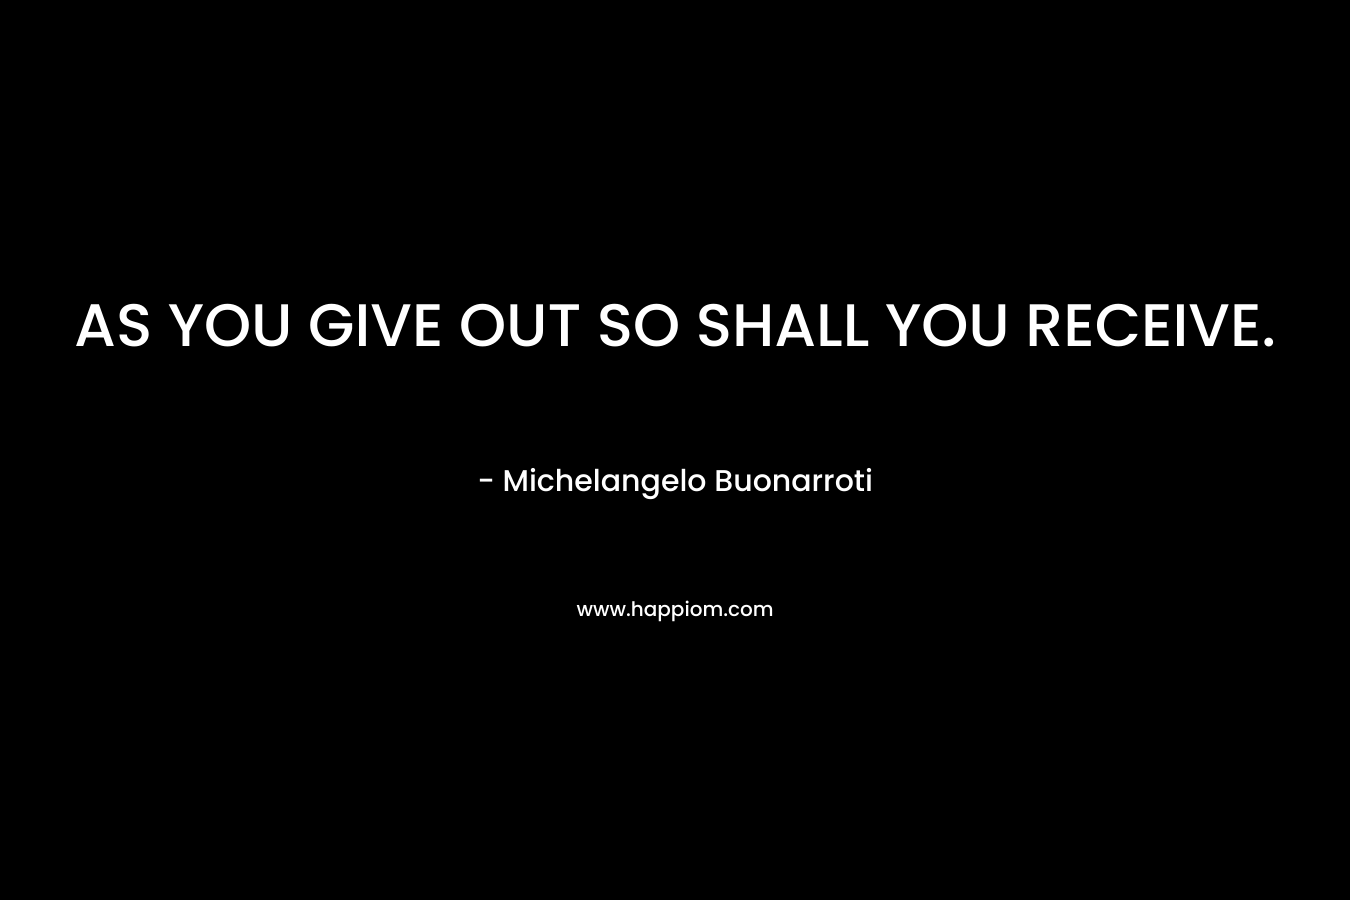 AS YOU GIVE OUT SO SHALL YOU RECEIVE. – Michelangelo Buonarroti